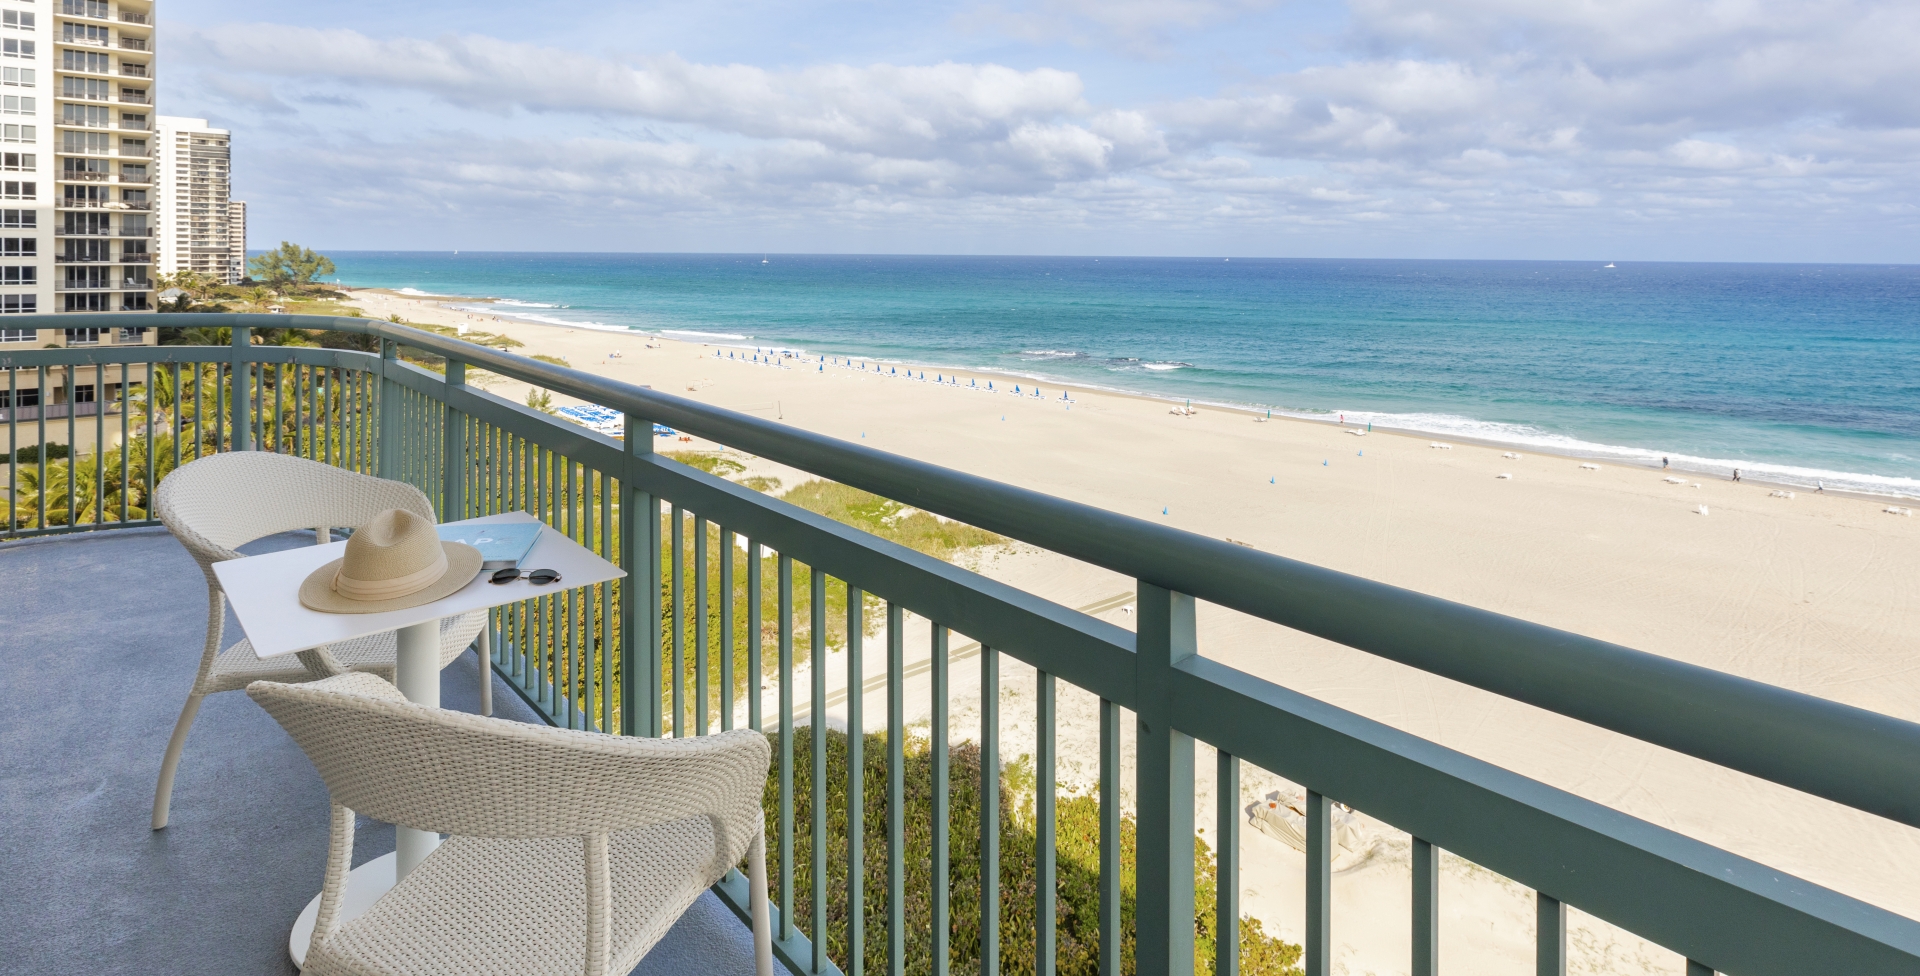 Balcony view from a luxury guest room at The Singer Oceanfront Resort